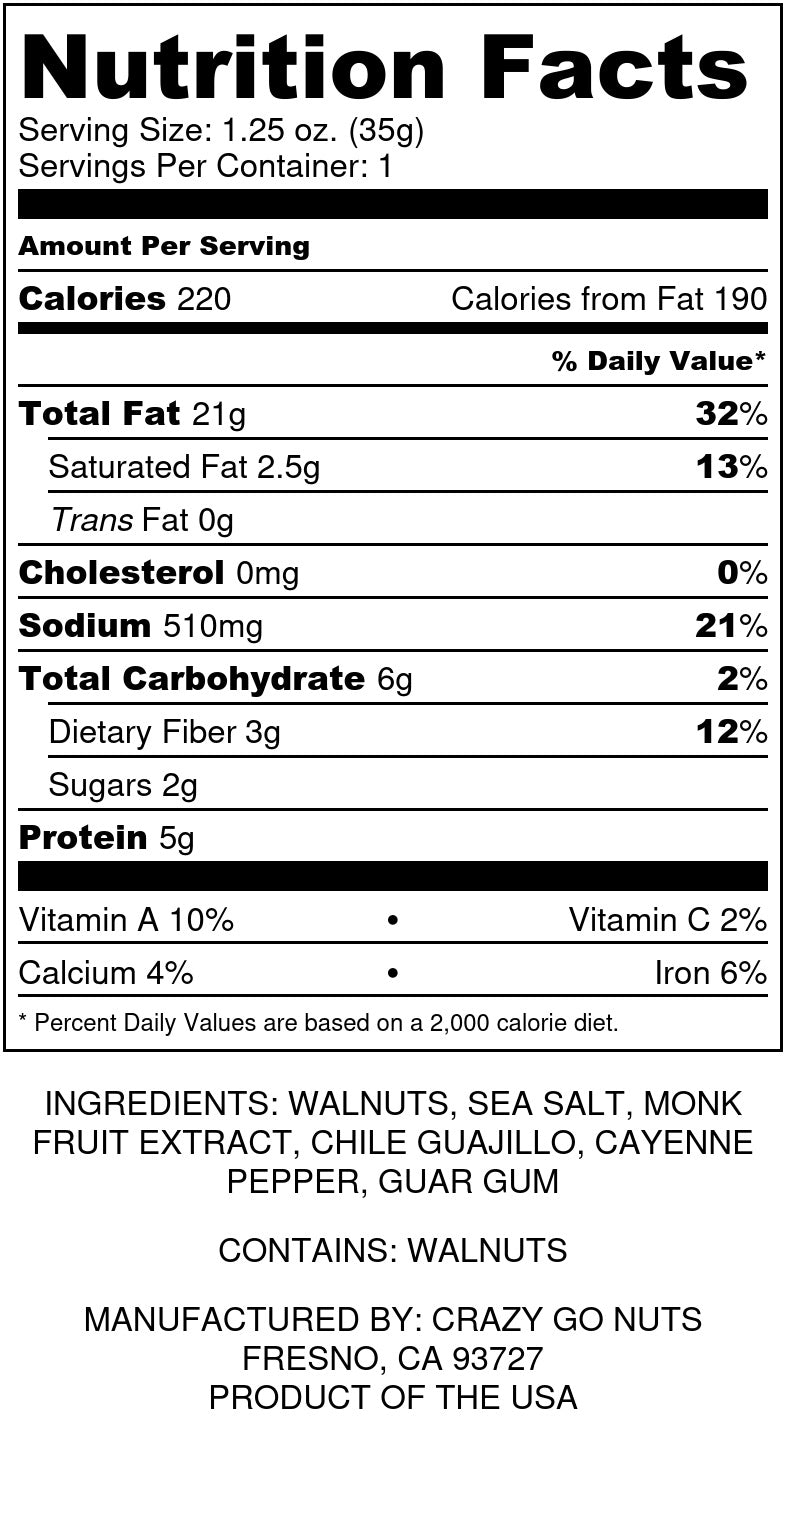 Nutrition panel for sweet and spicy walnut snacks. Ingredients include walnuts, sea salt, monk fruit, chili peppers, and guar gum